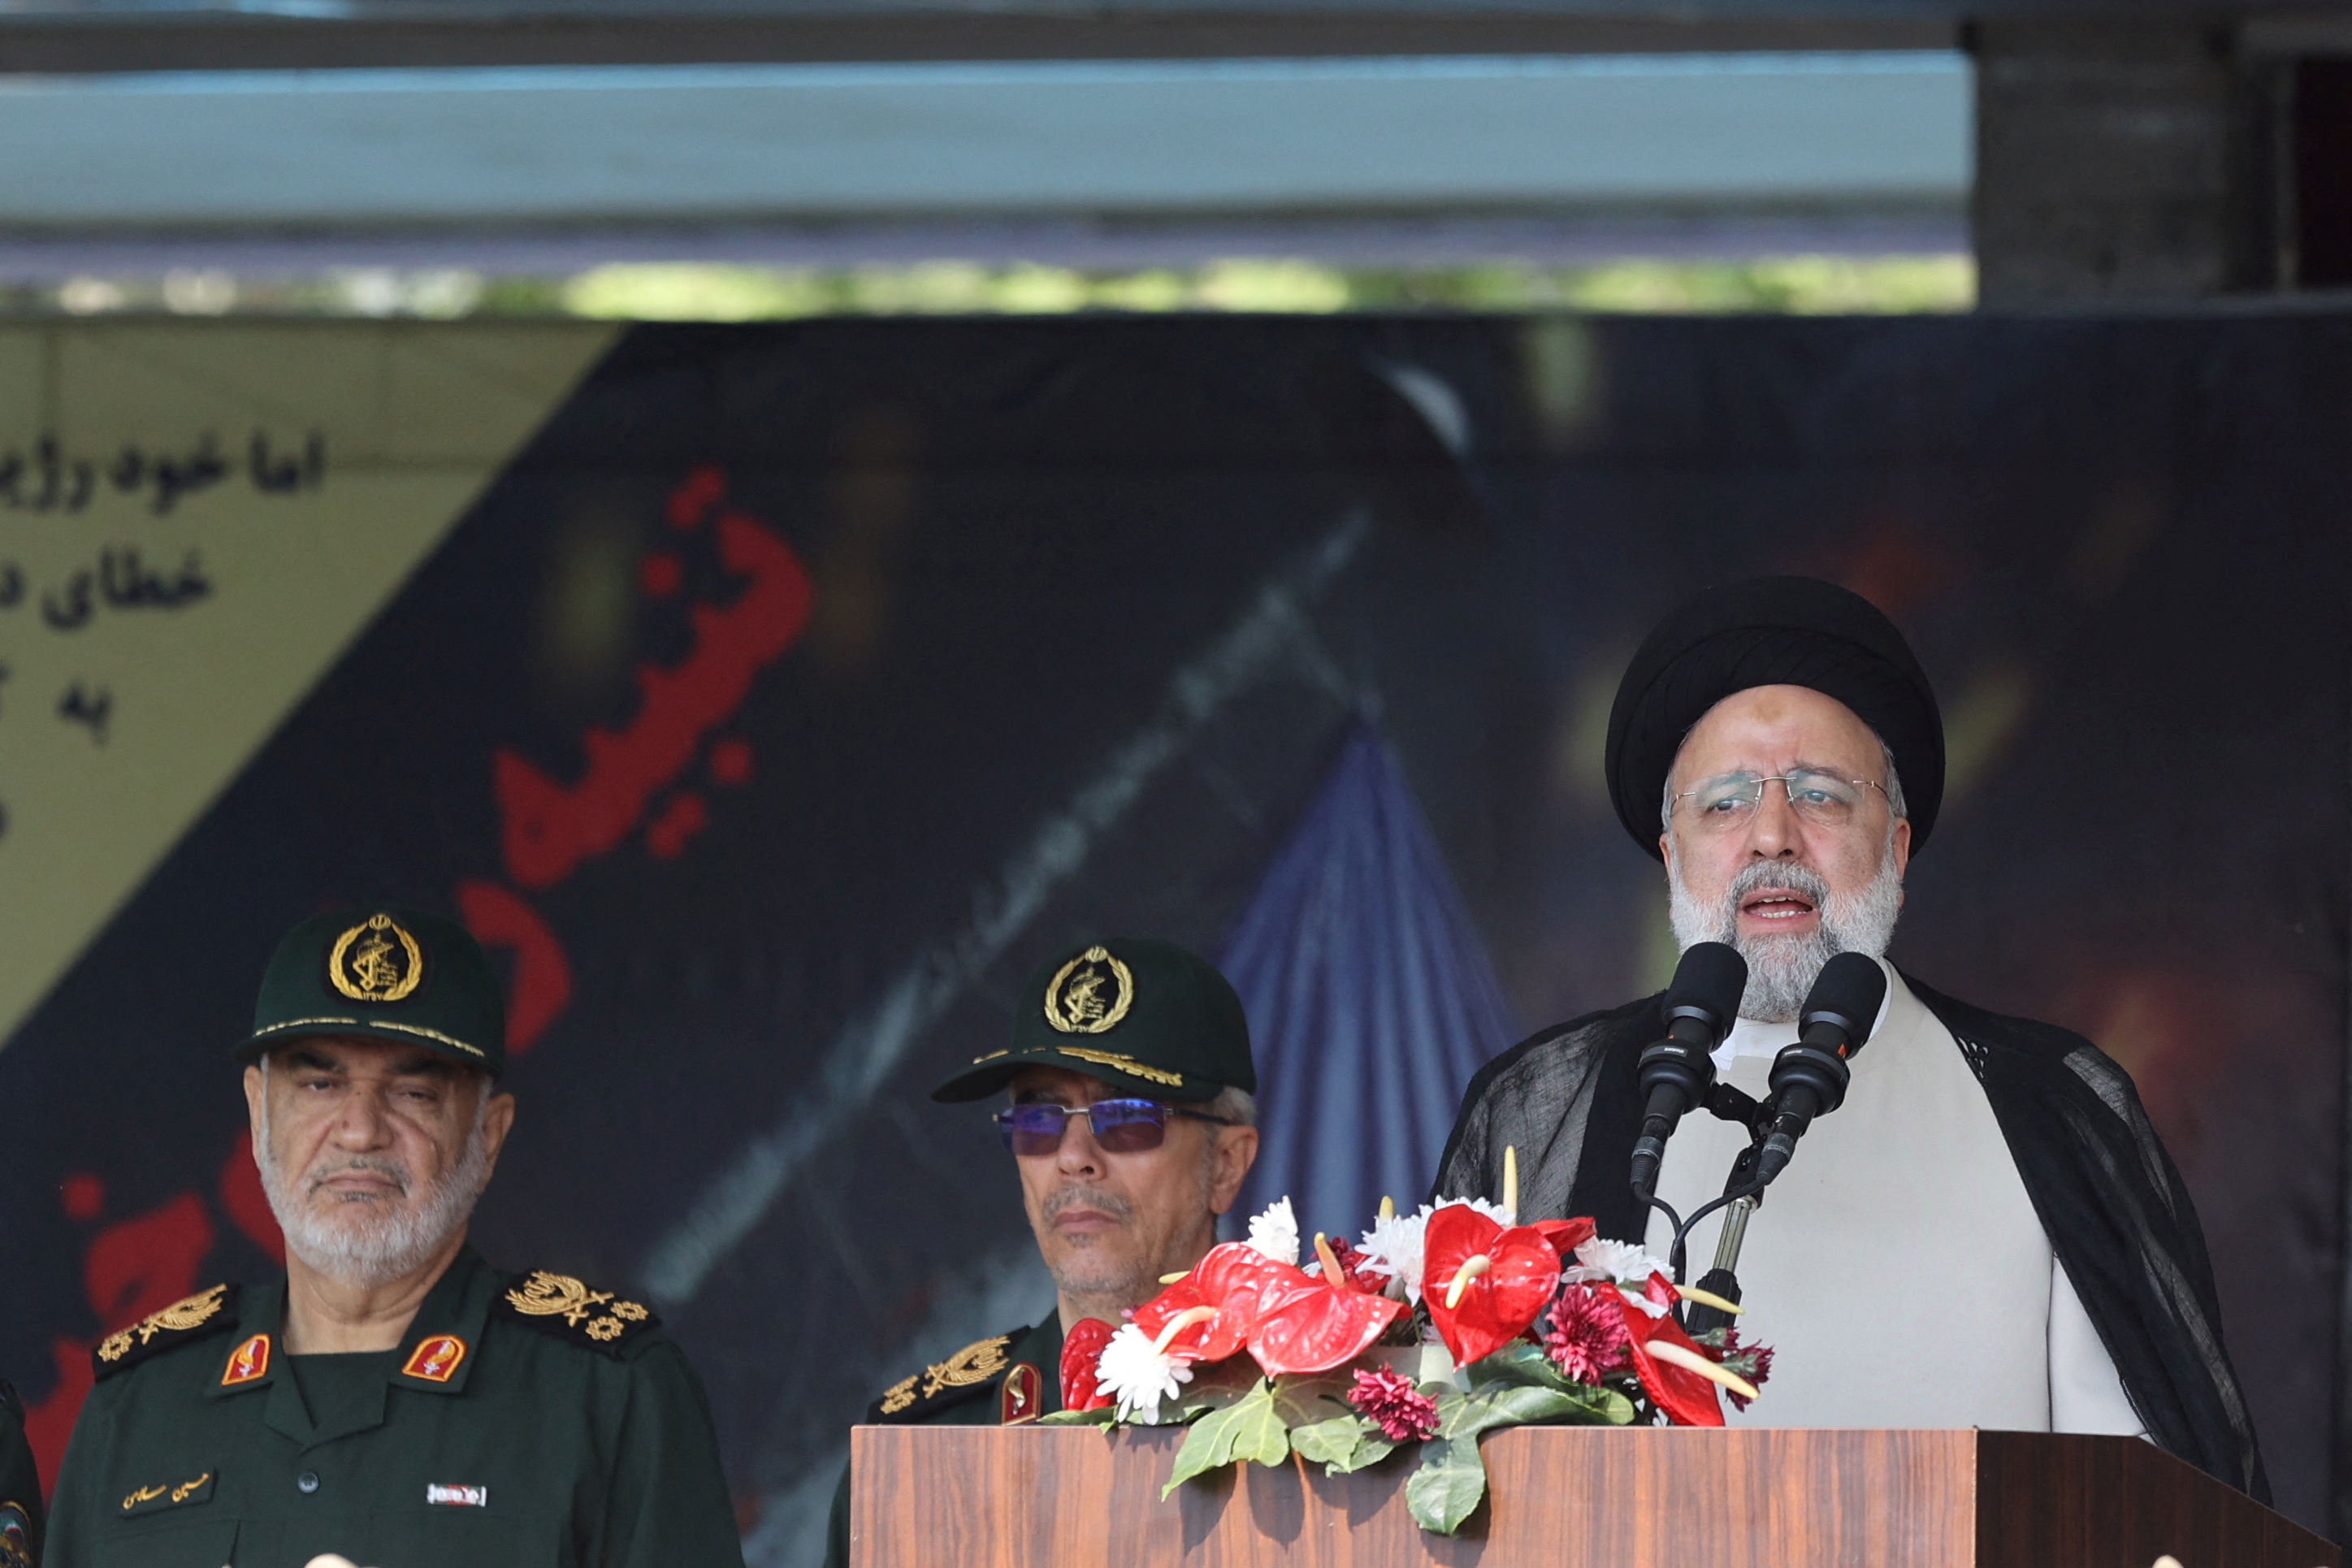 National Army Day parade ceremony in Tehran